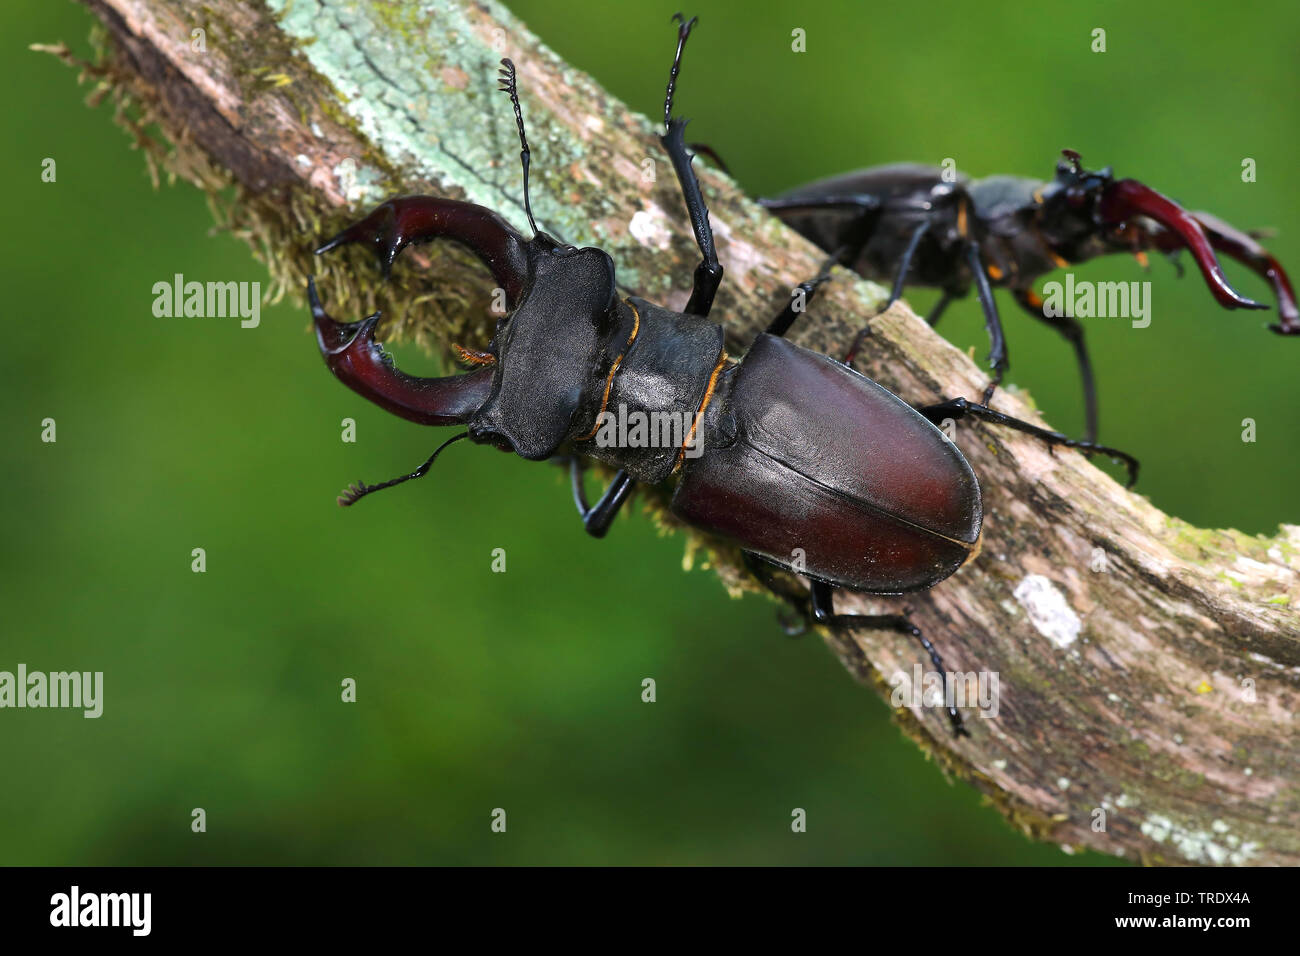 stag beetle, European stag beetle (Lucanus cervus), two males on a branch, Germany Stock Photo